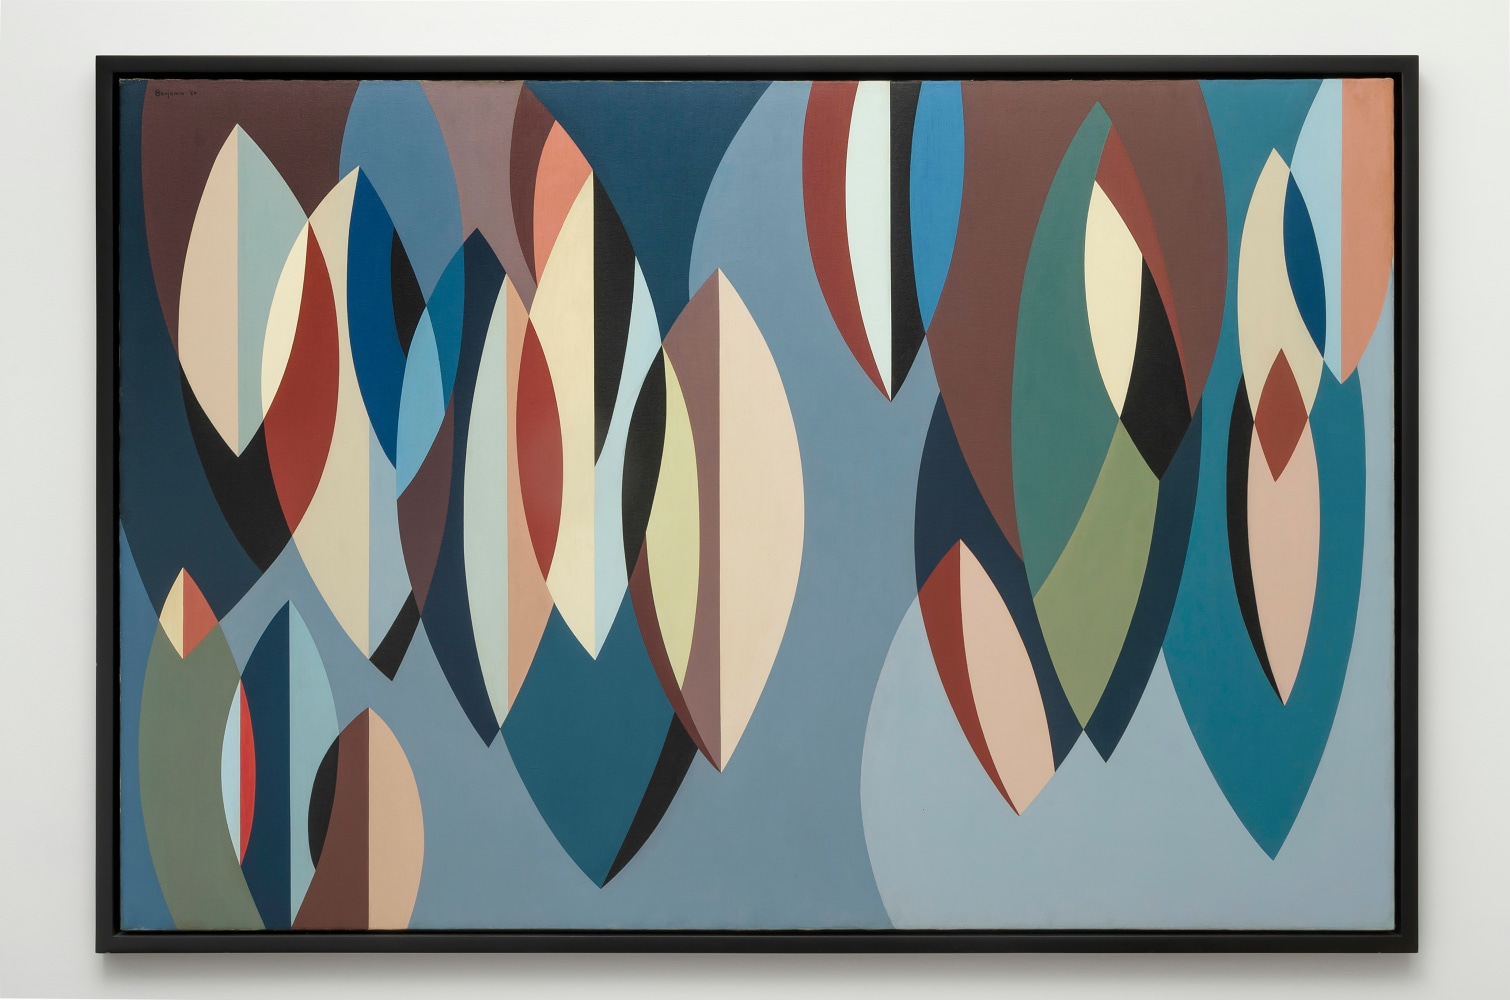 Elliptical Planes, 1956  oil on canvas 48 x 72 inches; 121.9 x 182.9 centimeters